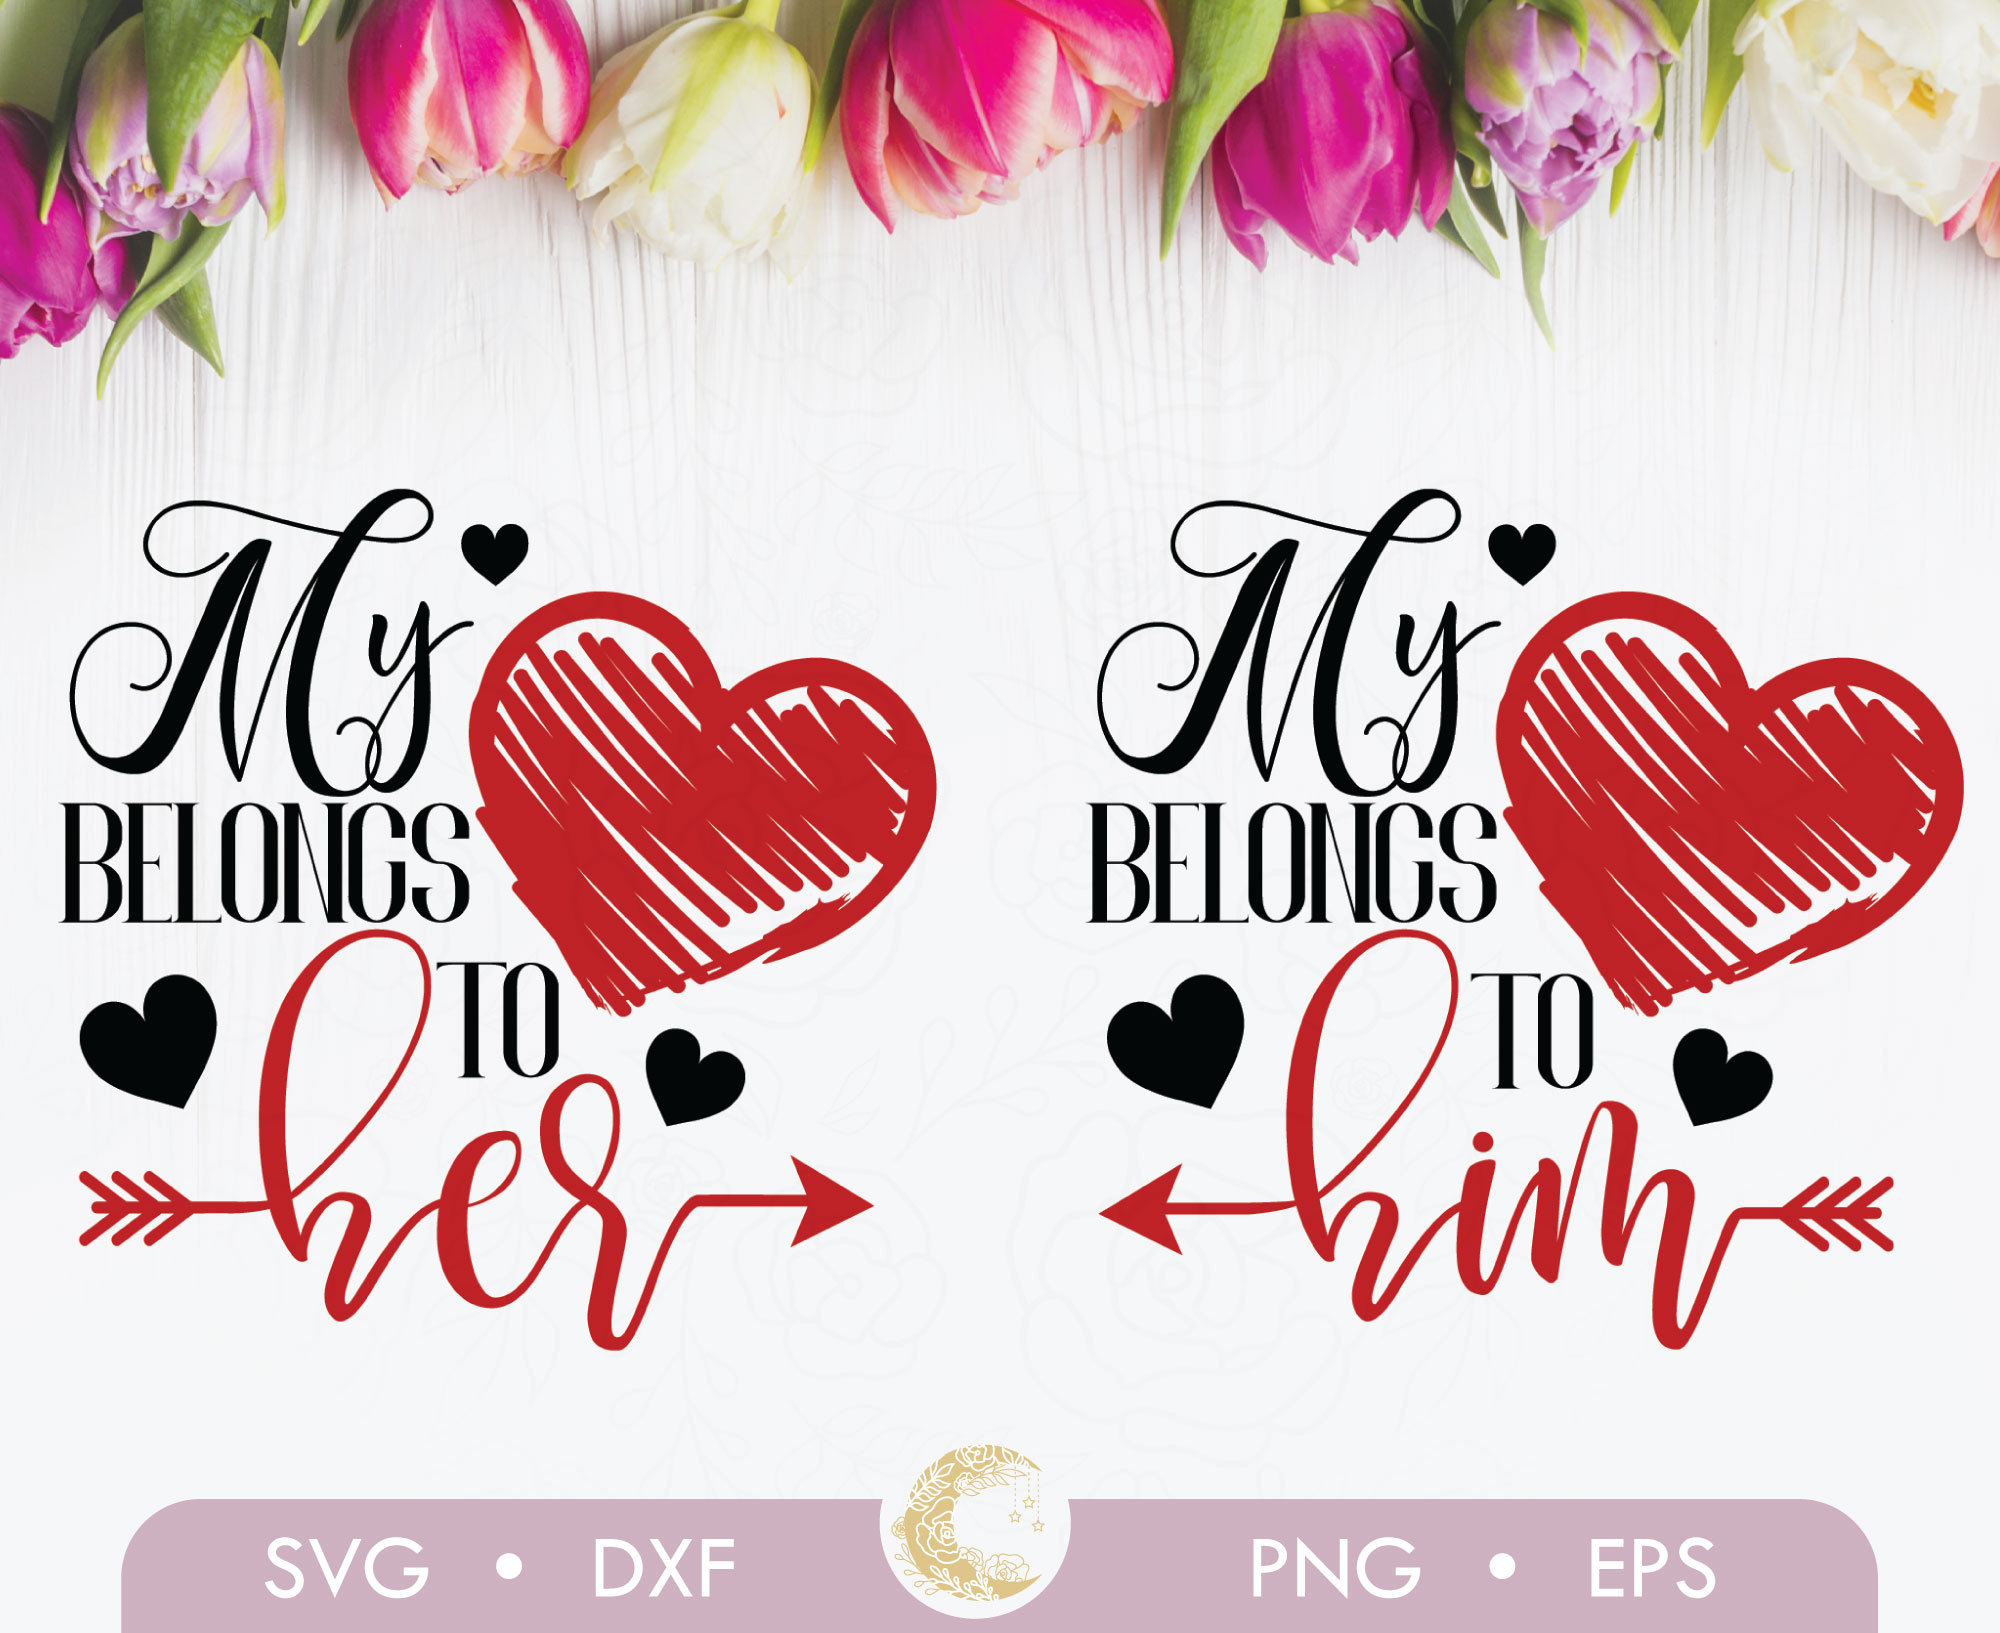 His and Hers SVG Cut File Bundle With Heart Detail for Cricut and  Silhouette, PNG, Eps, Dxf 